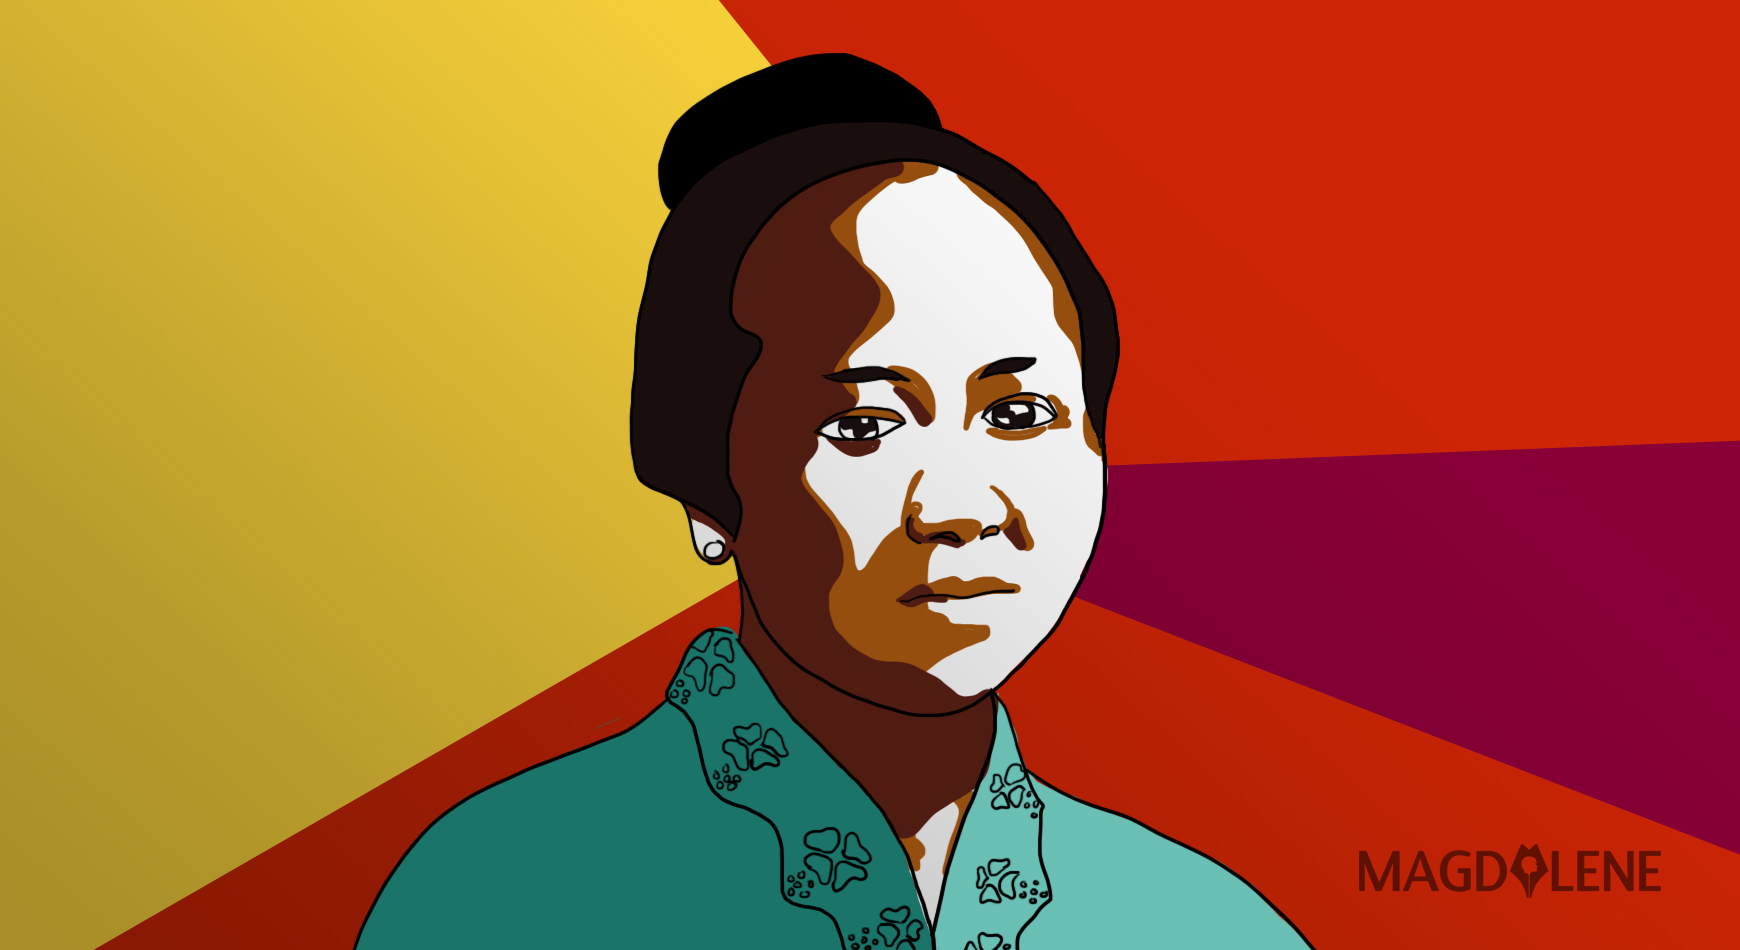 Kartini’s Legacy is About Empowerment Through Education and Literacy